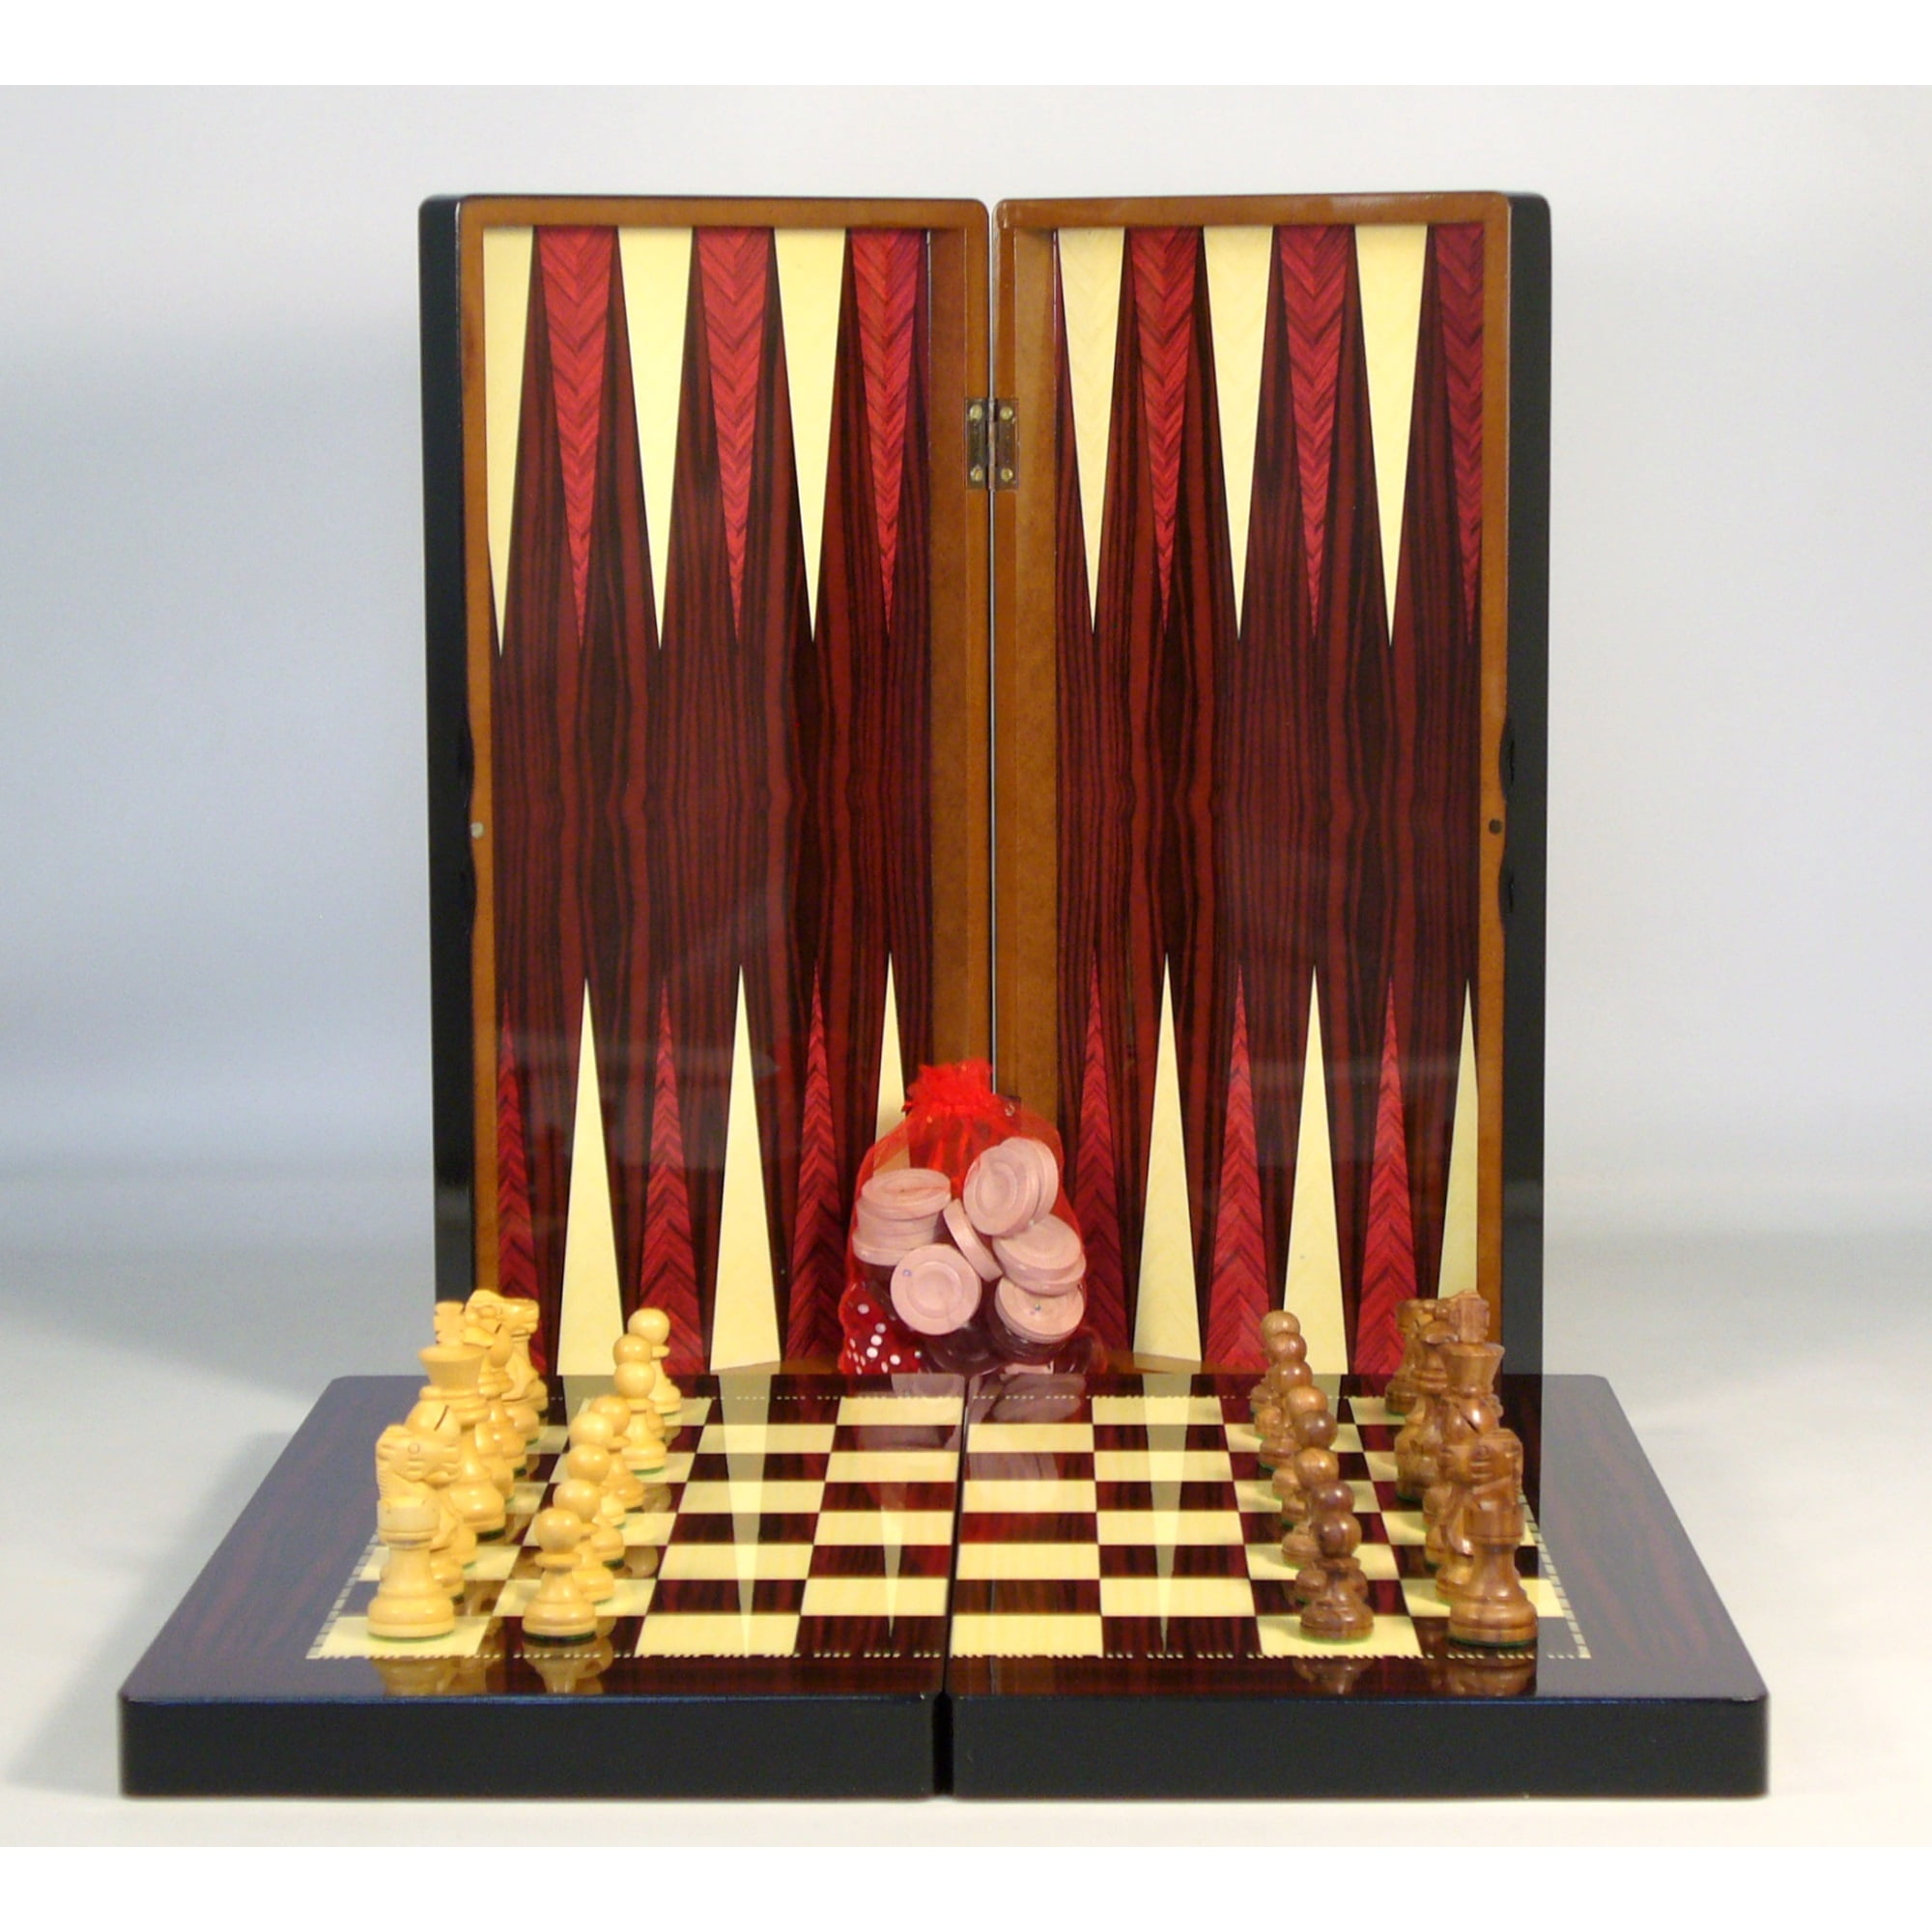 LARGE BACKGAMMON SET YENIGUN FOLDABLE WOODEN BOARD GAME WITH DOUBLING DICE 